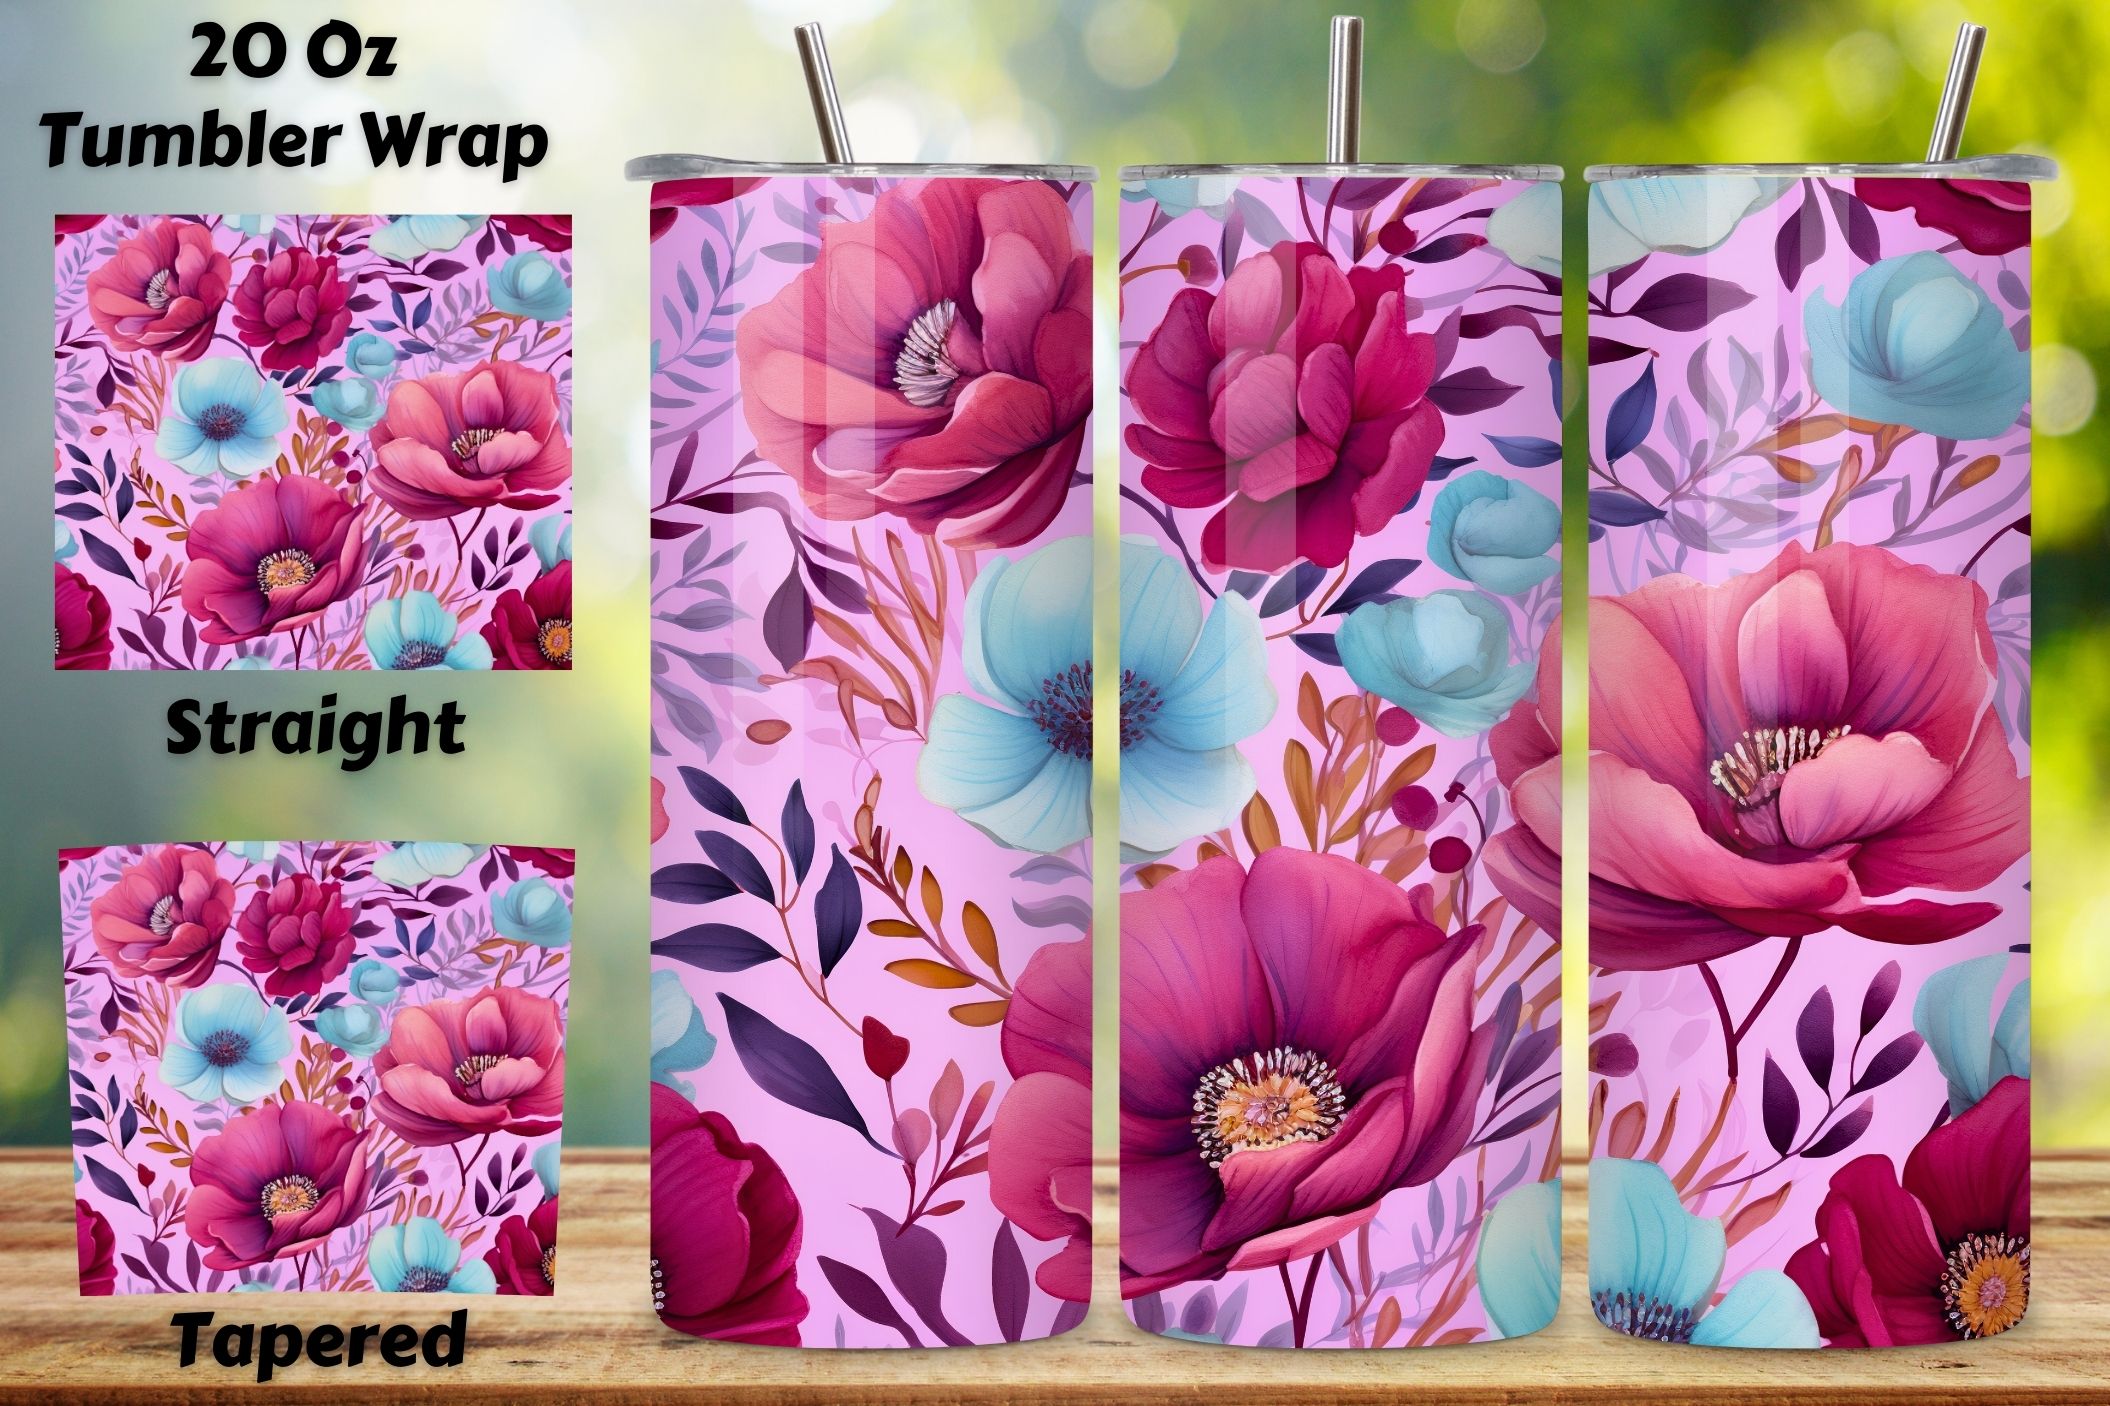 The Mint Flower Sprout - Skin Decal Vinyl Wrap Kit compatible with the –  DesignSkinz